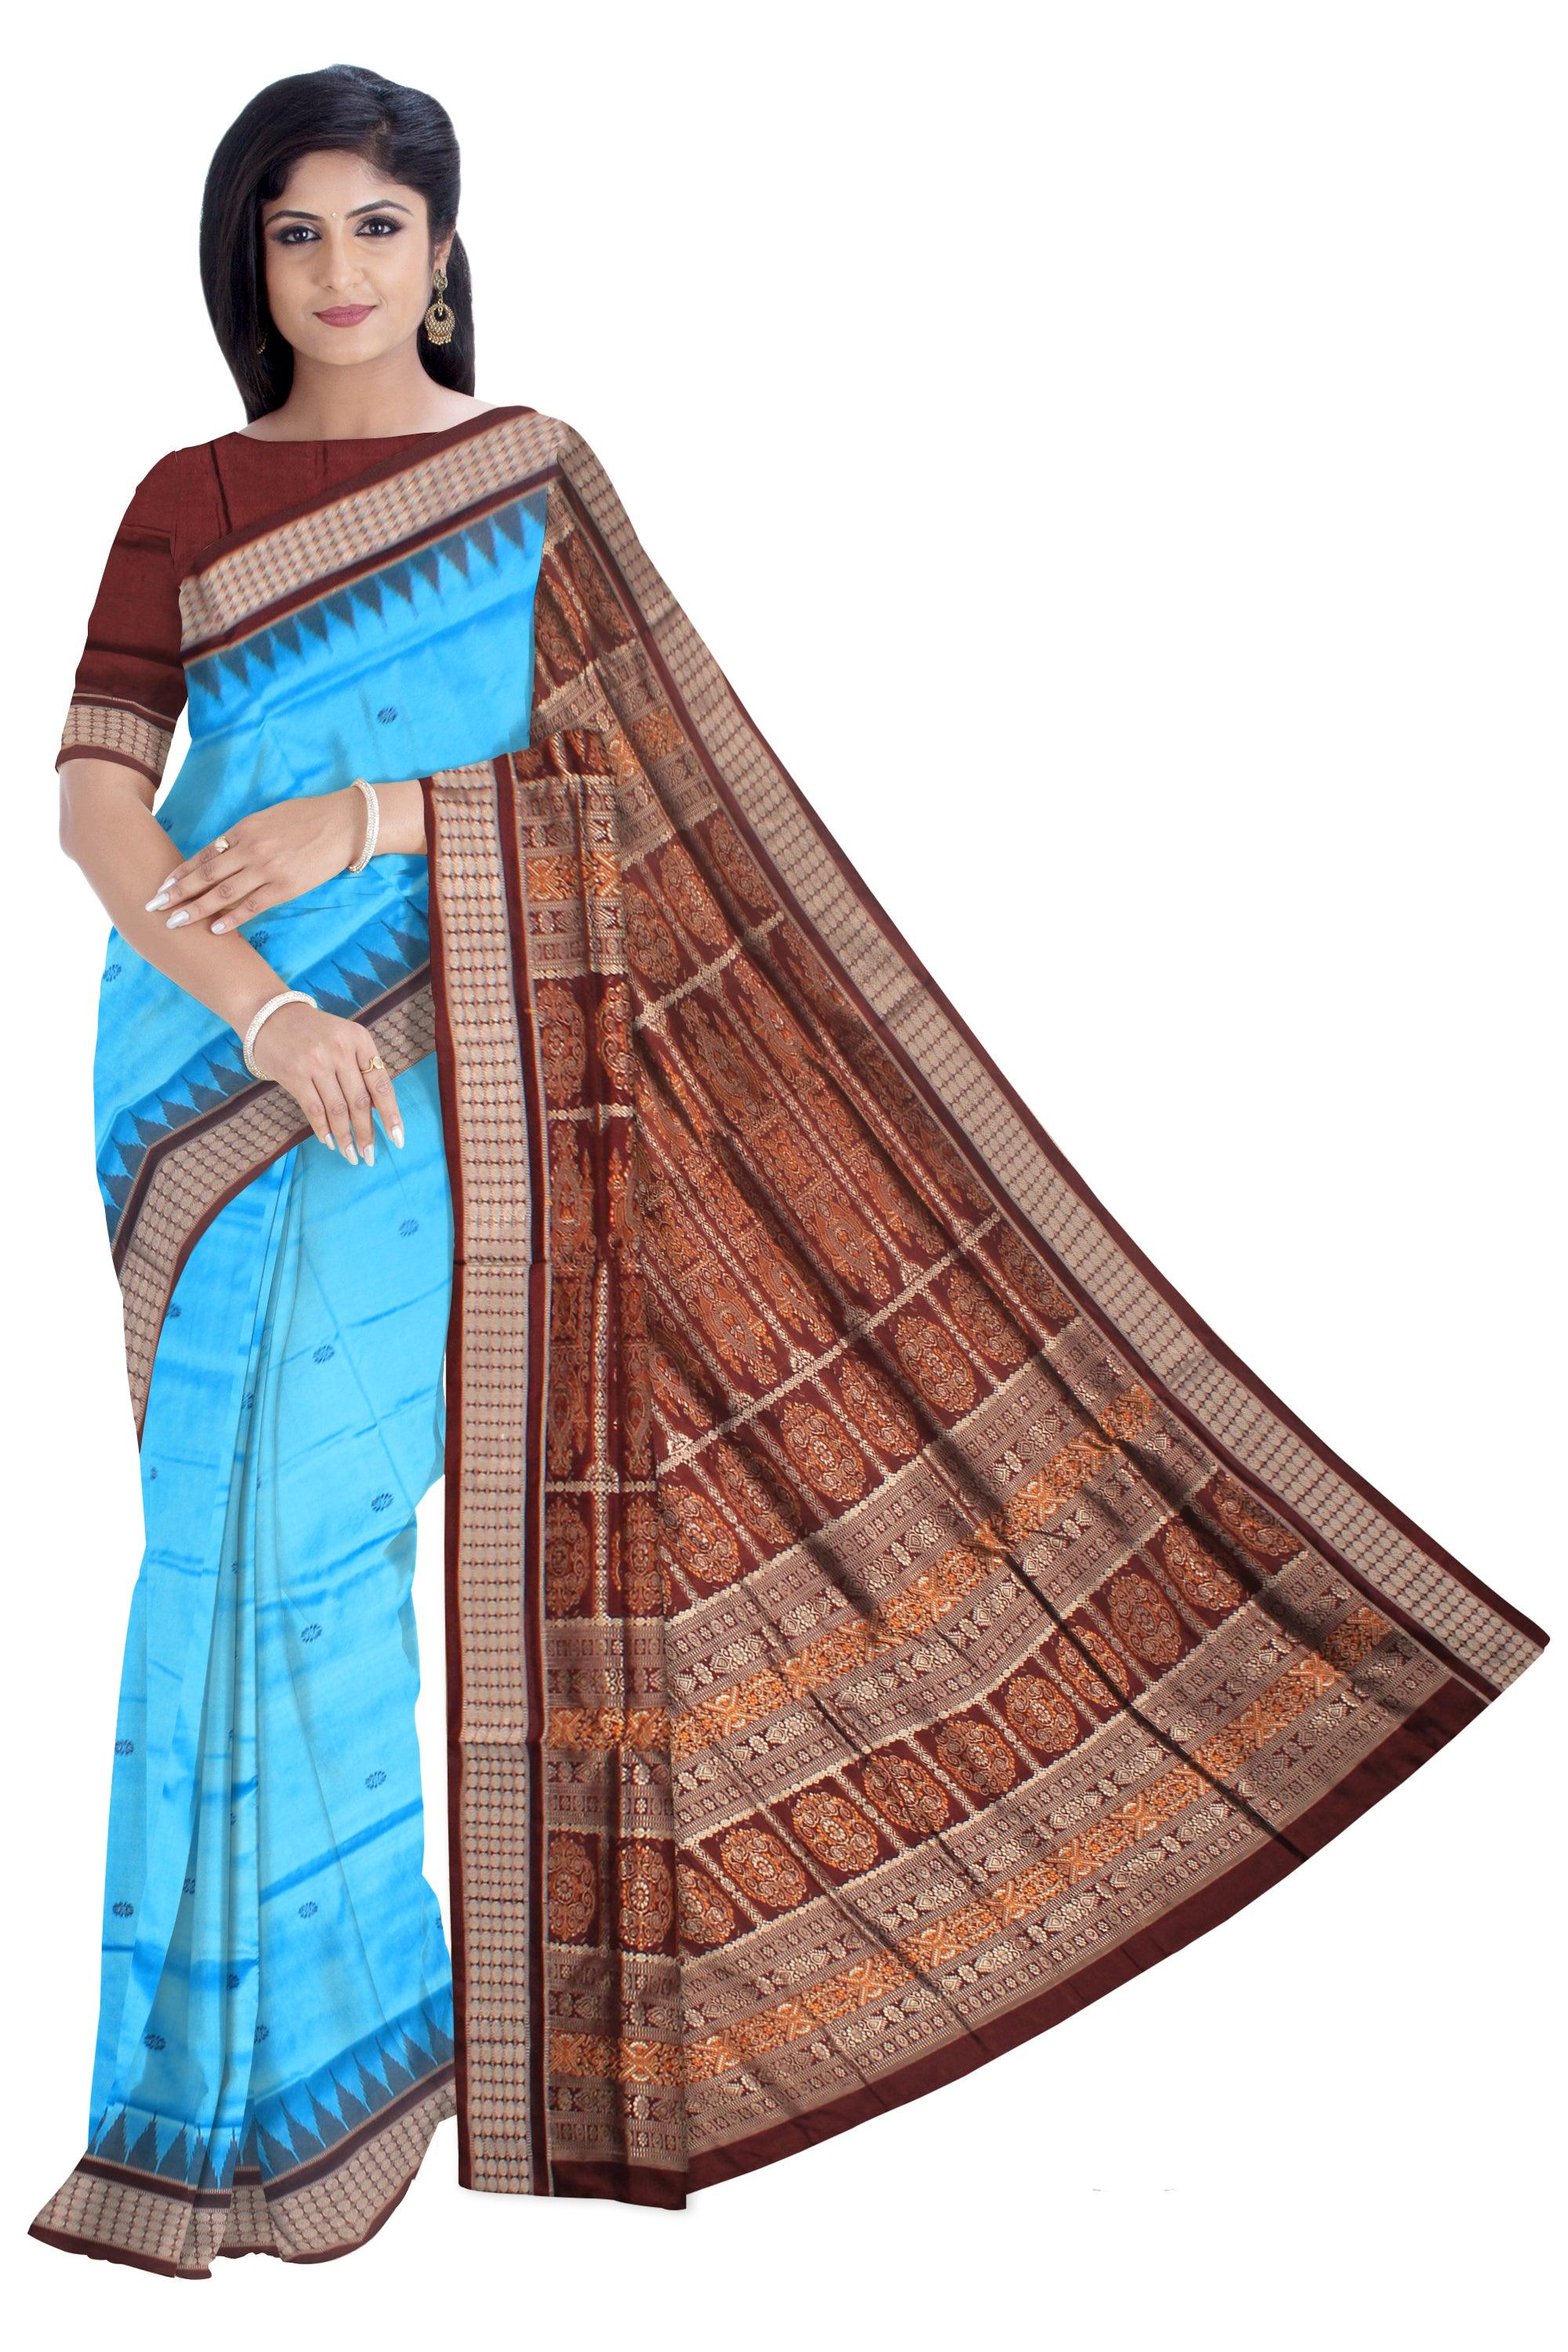 SKY AND COFFEE COLOR BOOTY PATTERN SONEPUR PATA SAREE, WITH BLOUSE PIECE. - Koshali Arts & Crafts Enterprise